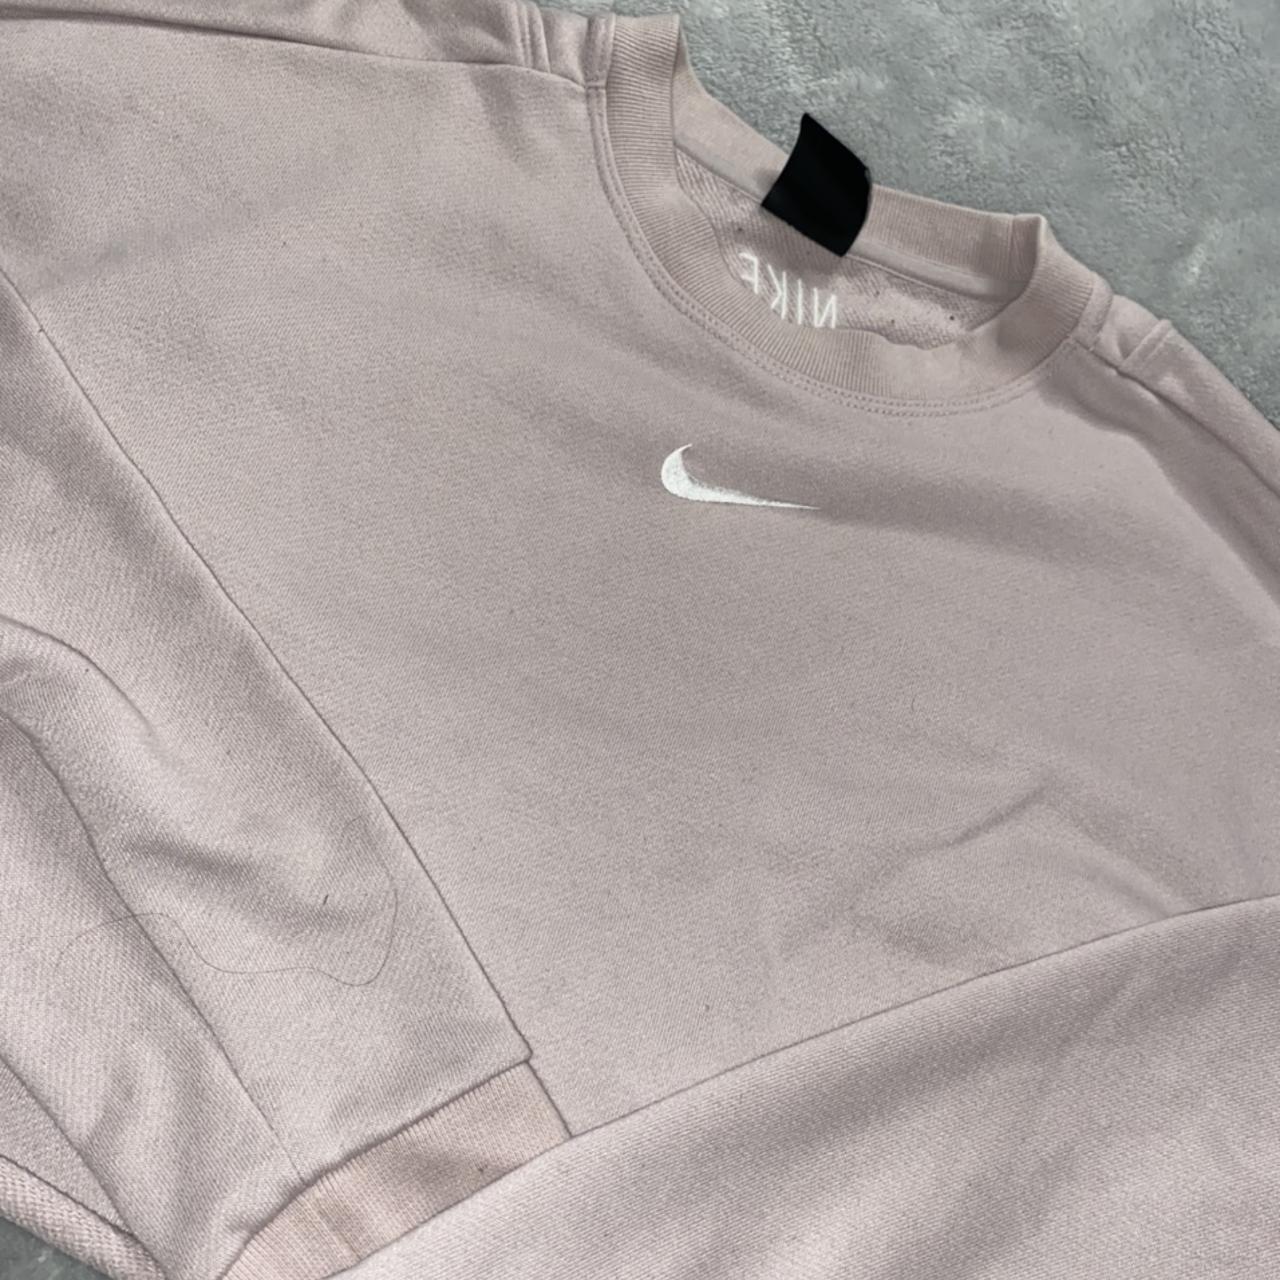 Used cropped light pink Nike sweatshirt with cut out... - Depop